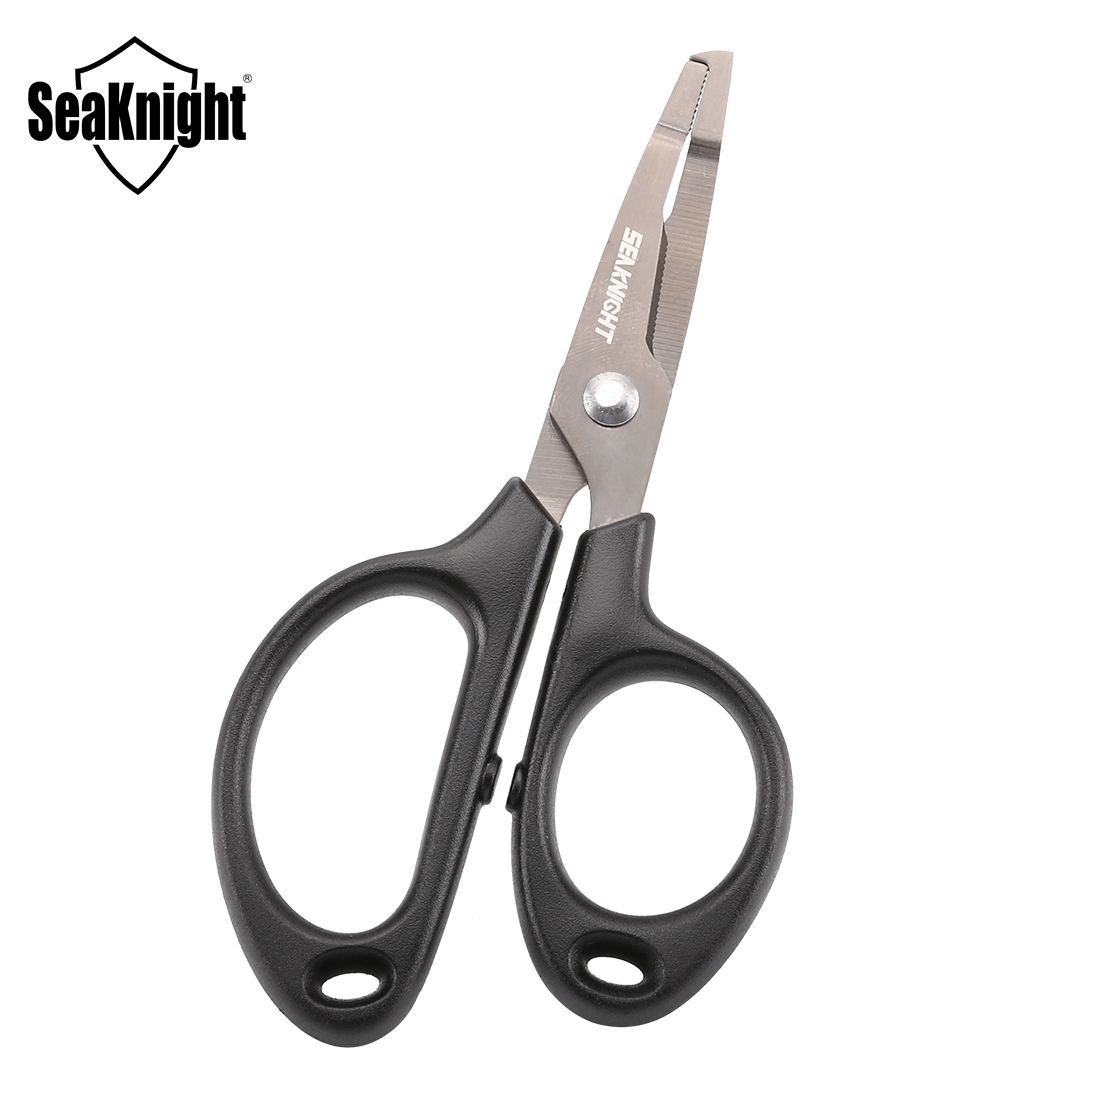 SeaKnight-Fishing-Multifunctional-Scissors-PE-line-Cut-Accessories-Fish-Tackle-Lure-Hook-Remover-1116012